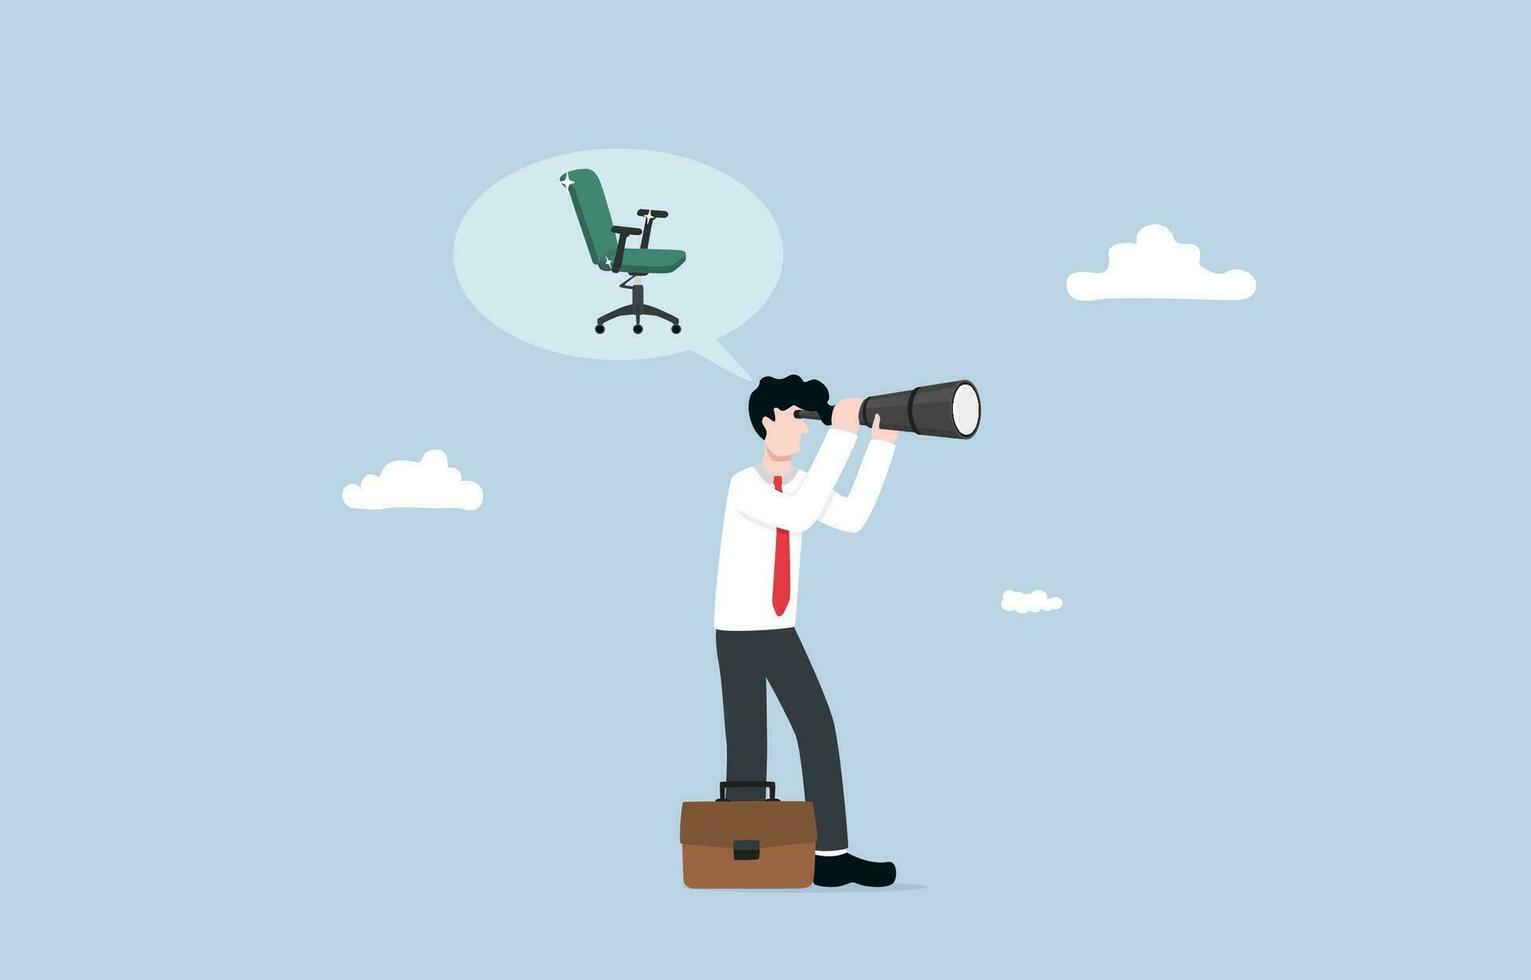 Job search, seeking for interest job position, new career opportunity for bright future concept, Businessman using telescope to find new vacant chair. vector